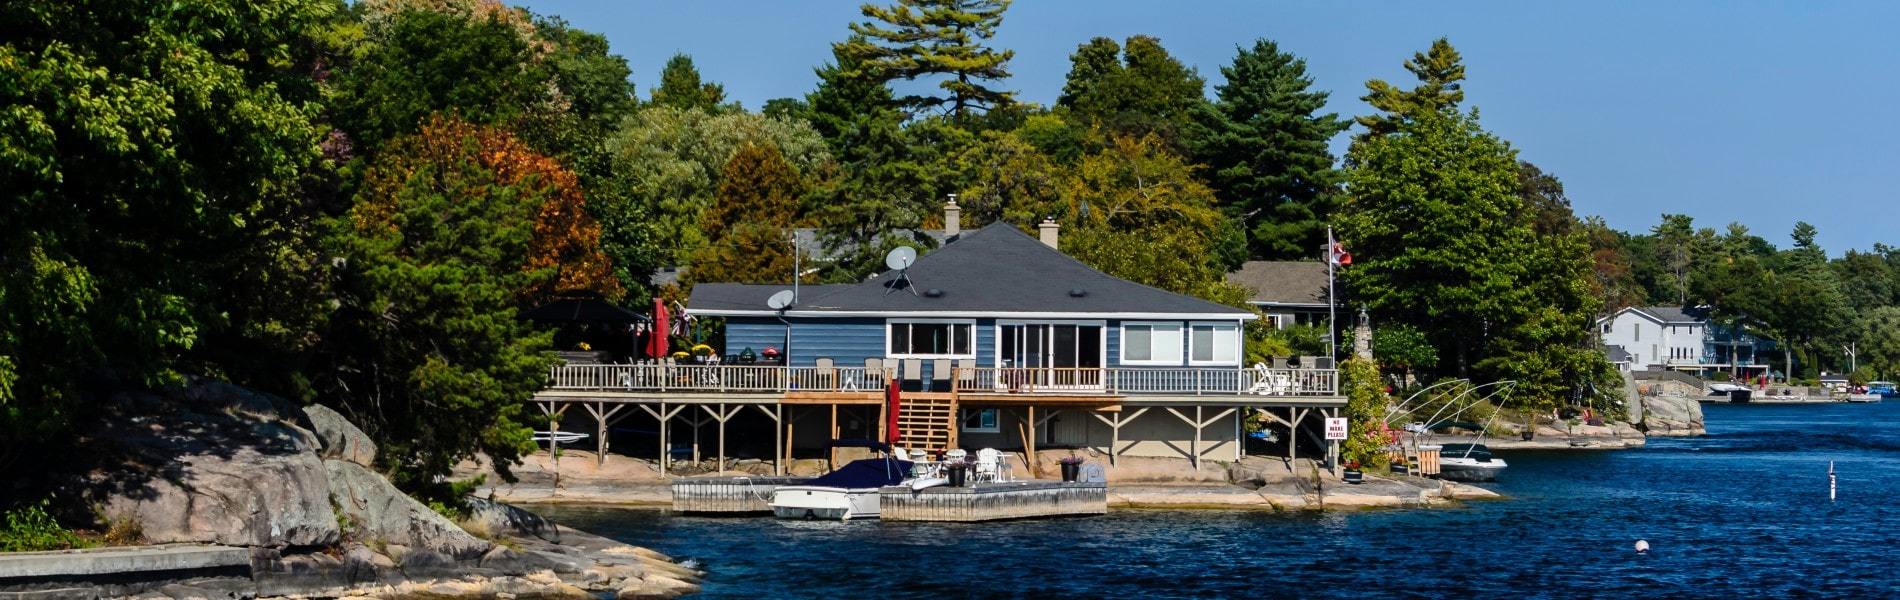 Waterfront cottage seen in Ontario lakefront real estate